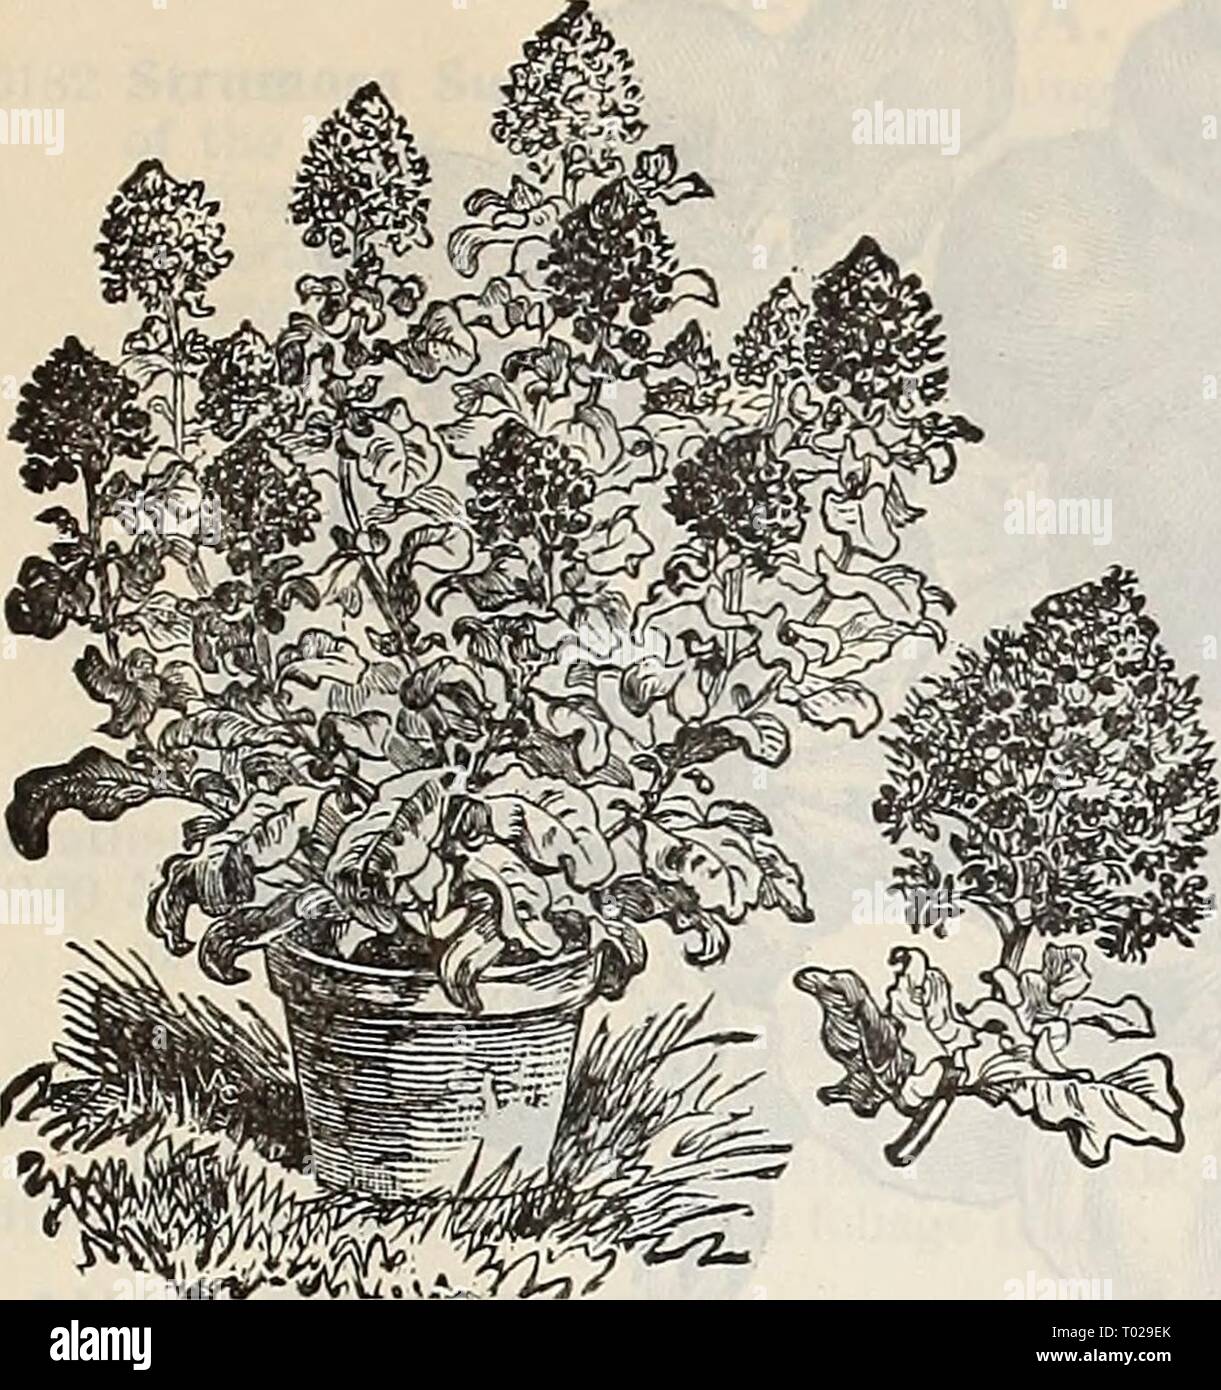 Dreer's garden calendar : 1897 . dreersgardencale1897henr Year: 1897  DREER'S RELIABLE FLOWER SEEDS. 79    flignonette. Machet Mignonette. MOMORDICA. (Balsam Apple.) Very curious climbing vines, with ornamental foliage, fruit golden yel- low, warted, and when ripe opens showing the seed and its brilliant car- mine interior; fine for trellises, rock- work, stumps, etc.; annual; 10 feet. PER PKT. 6116 Balsamina. {Balsam Apple.) Apple-shaped fruit. Per oz. 50 cts 5 6117 Charantia. (Balsam Pear.) Pear-shaped fruit. Per oz. 50 cts 5 MUSA ENSETE. (Abyssinian Banana.) 6131 A splendid plant for the op Stock Photo